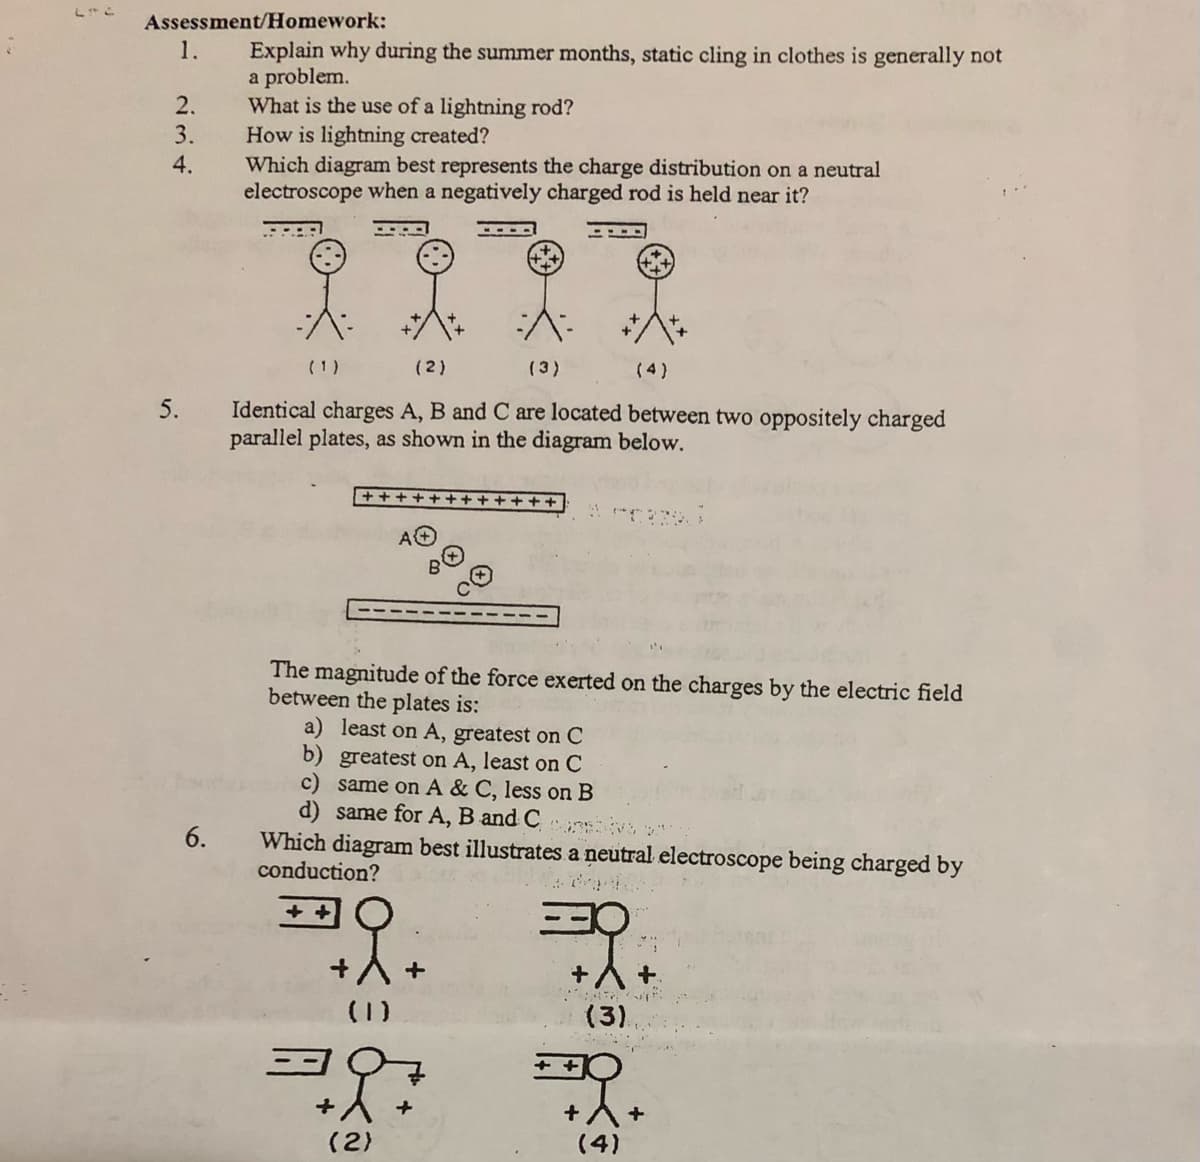 Assessment/Homework:
1.
Explain why during the summer months, static cling in clothes is generally not
a problem.
What is the use of a lightning rod?
How is lightning created?
Which diagram best represents the charge distribution on a neutral
electroscope when a negatively charged rod is held near it?
2.
3.
4.
(1)
(2)
(3)
(4)
5.
Identical charges A, B and C are located between two oppositely charged
parallel plates, as shown in the diagram below.
ト
The magnitude of the force exerted on the charges by the electric field
between the plates is:
a) least on A, greatest on C
b) greatest on A, least on C
c) same on A & C, less on B
d) same for A, B and C
6.
Which diagram best illustrates a neutral electroscope being charged by
conduction?
(1)
(3)
+A+
(4)
(2)
